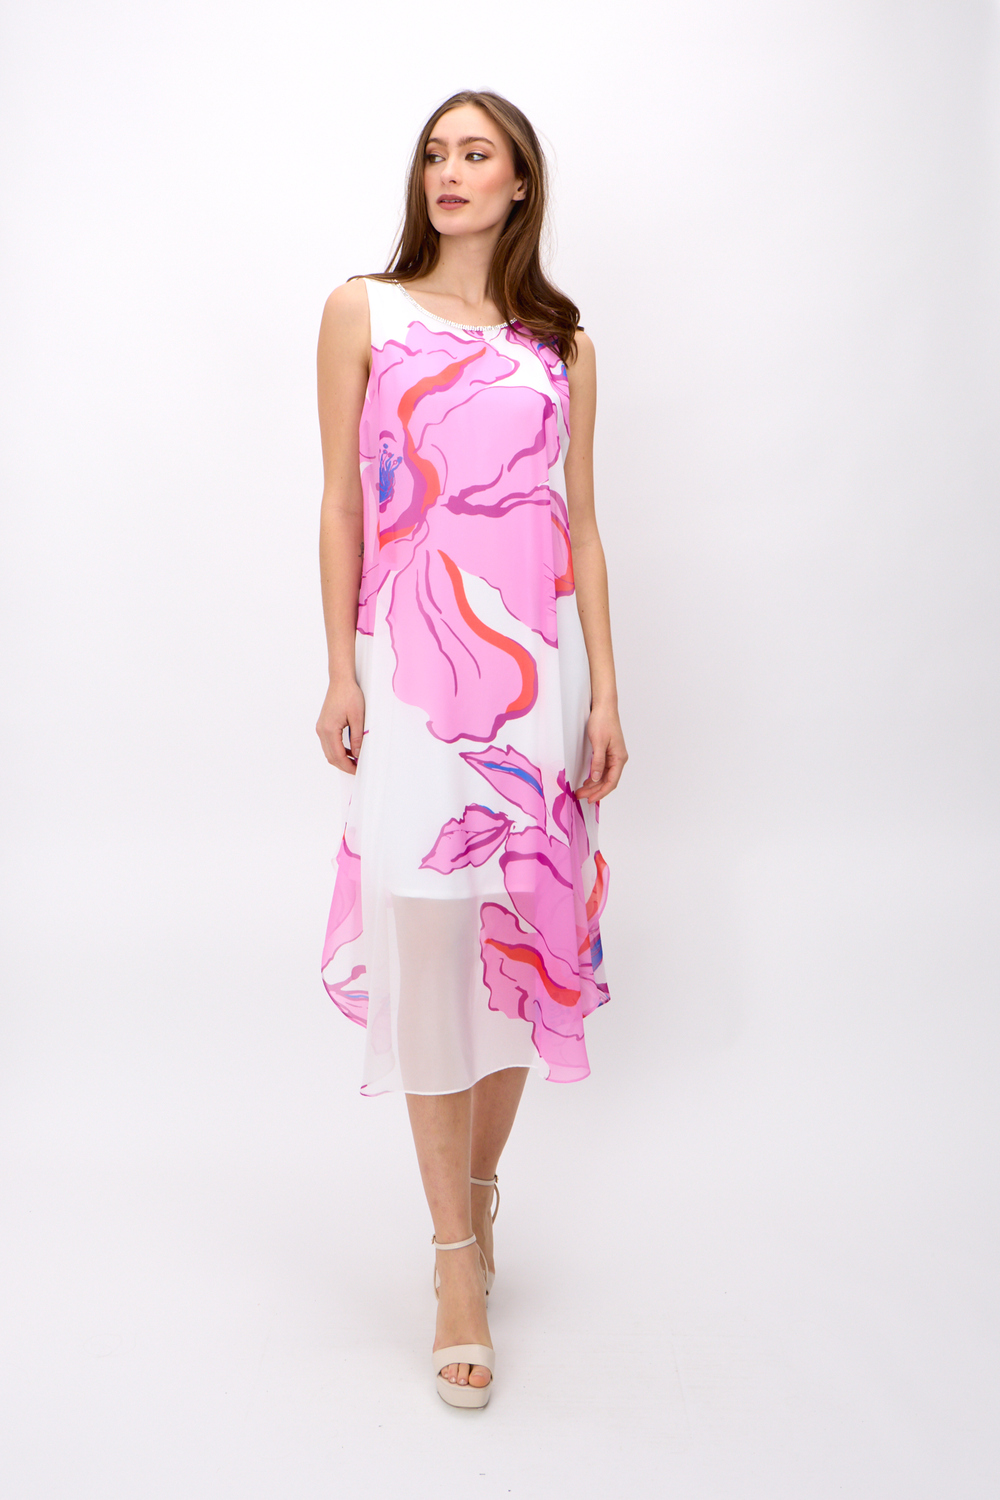 Hibiscus Print Dress Style 248172. Offwhite/pink